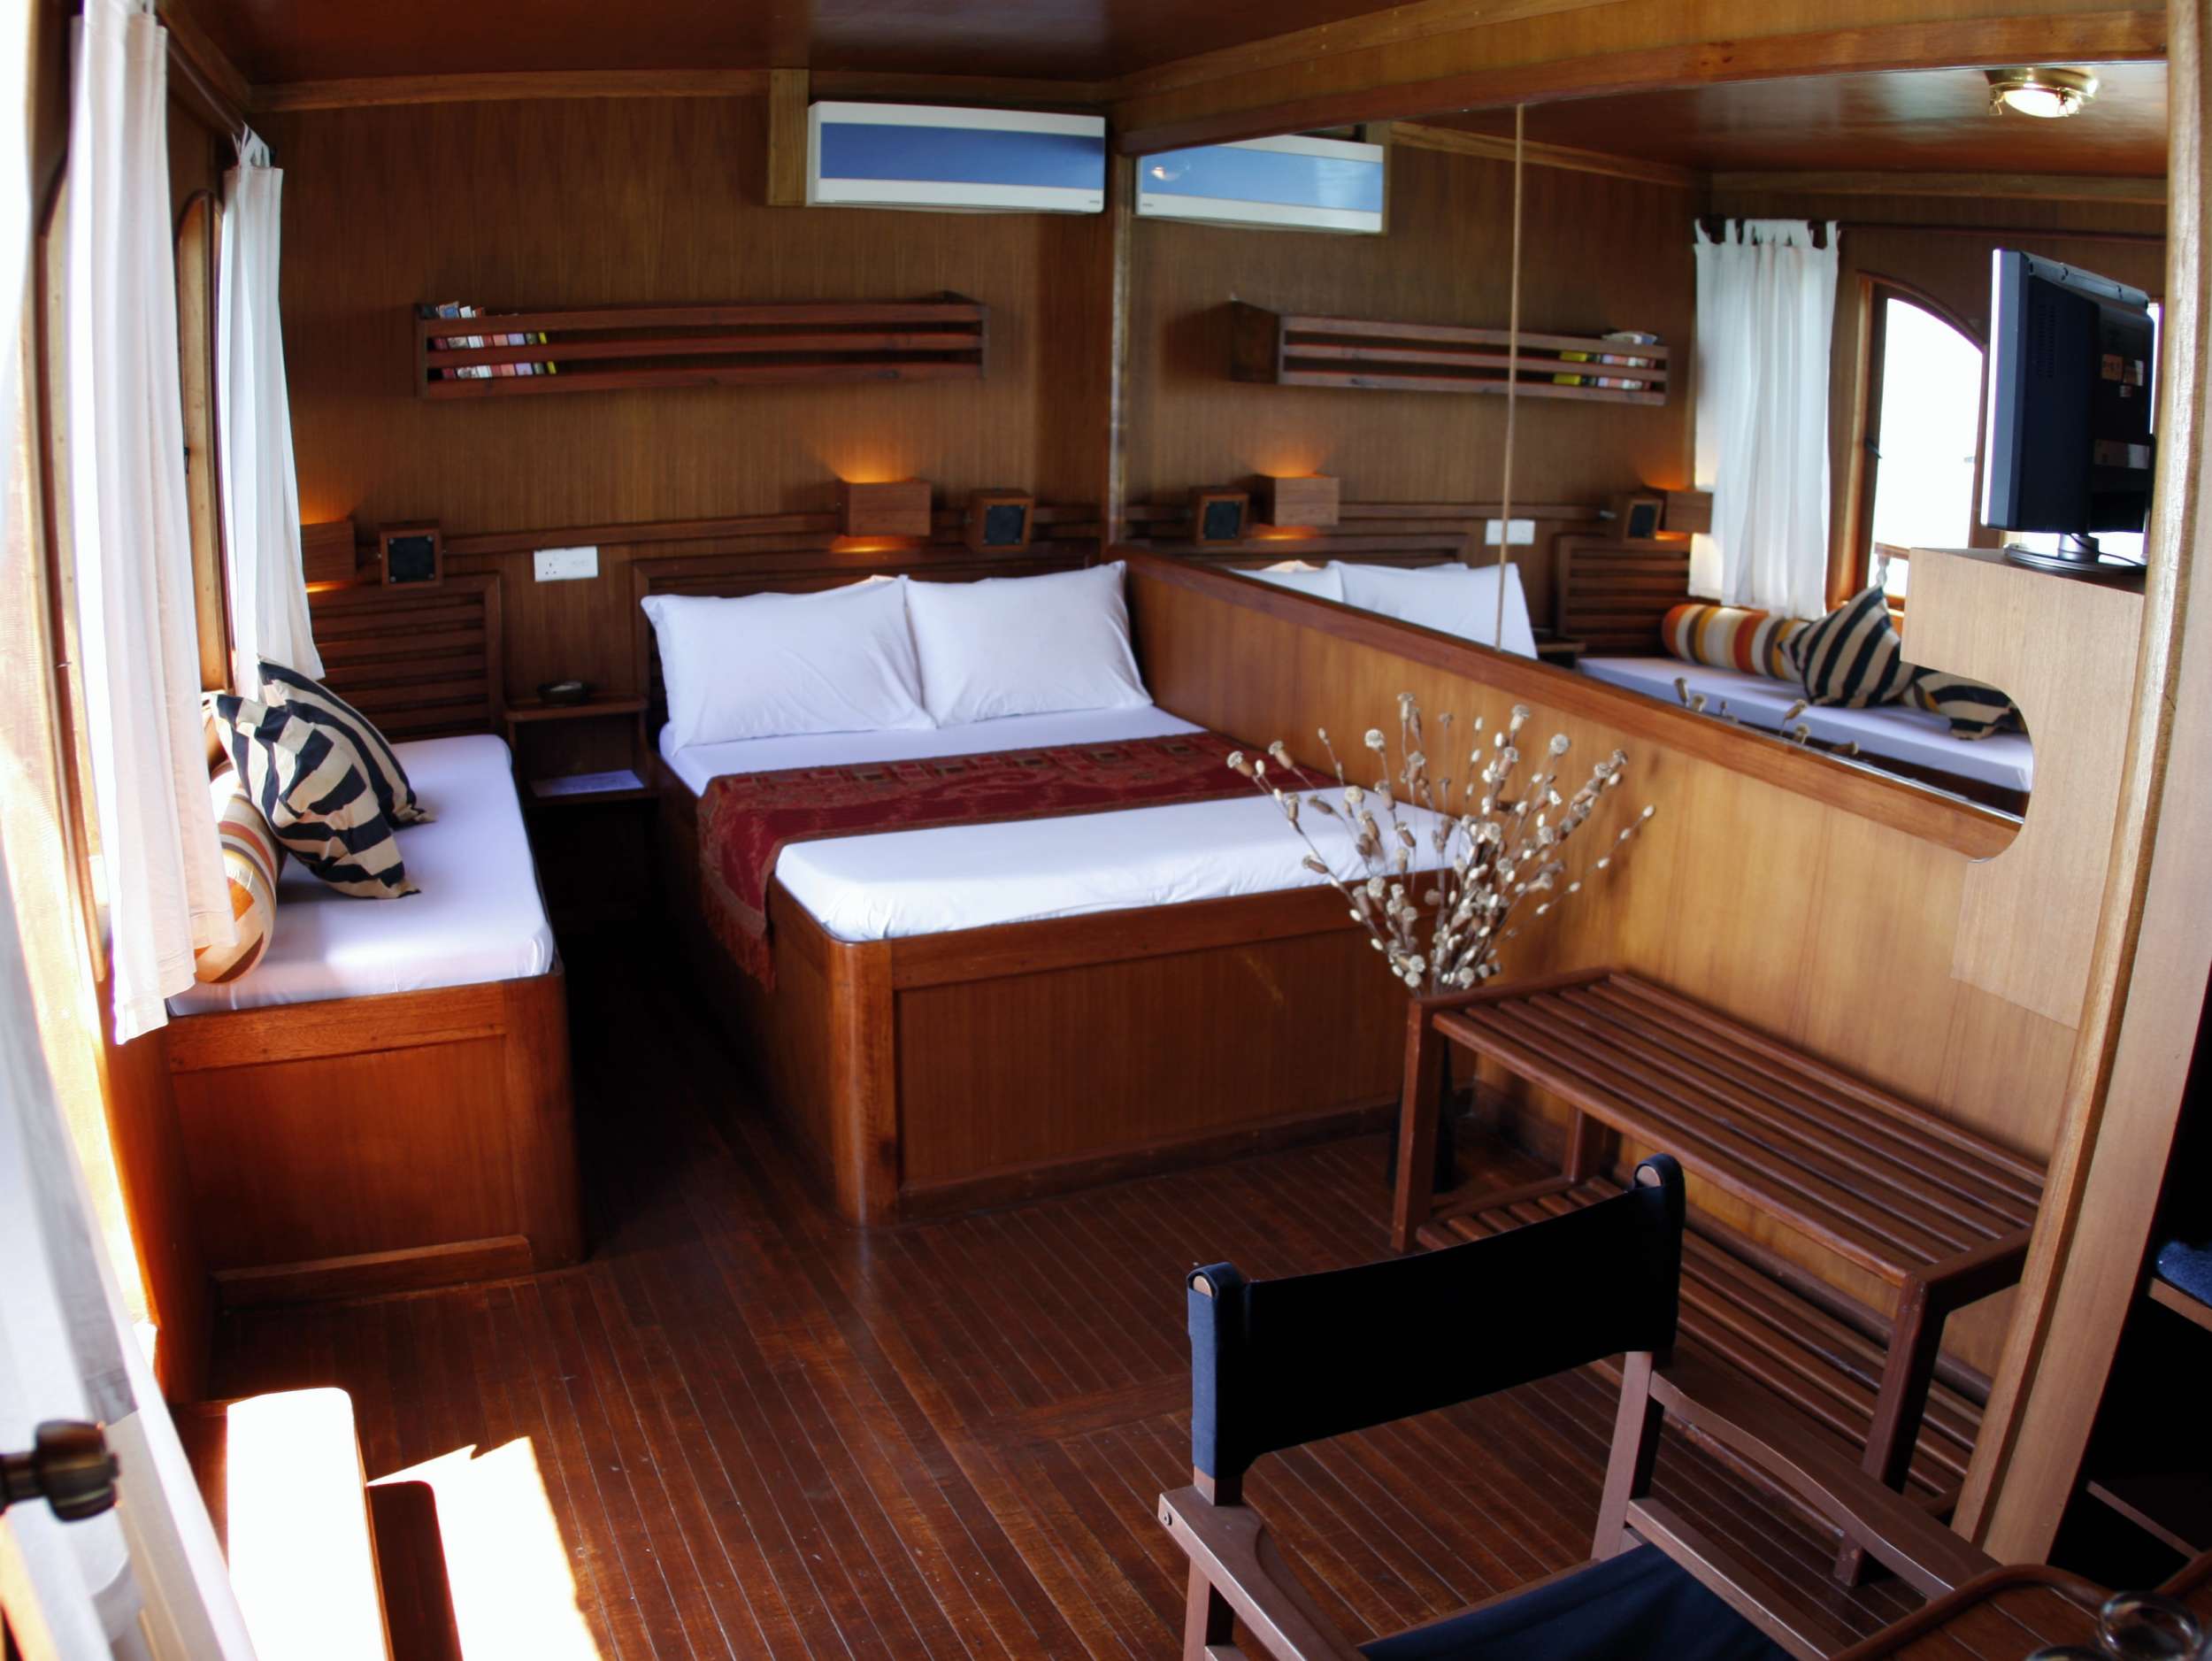 DHONI STELLA 2 - Luxury yacht charter Thailand & Boat hire in Indian Ocean & SE Asia 6